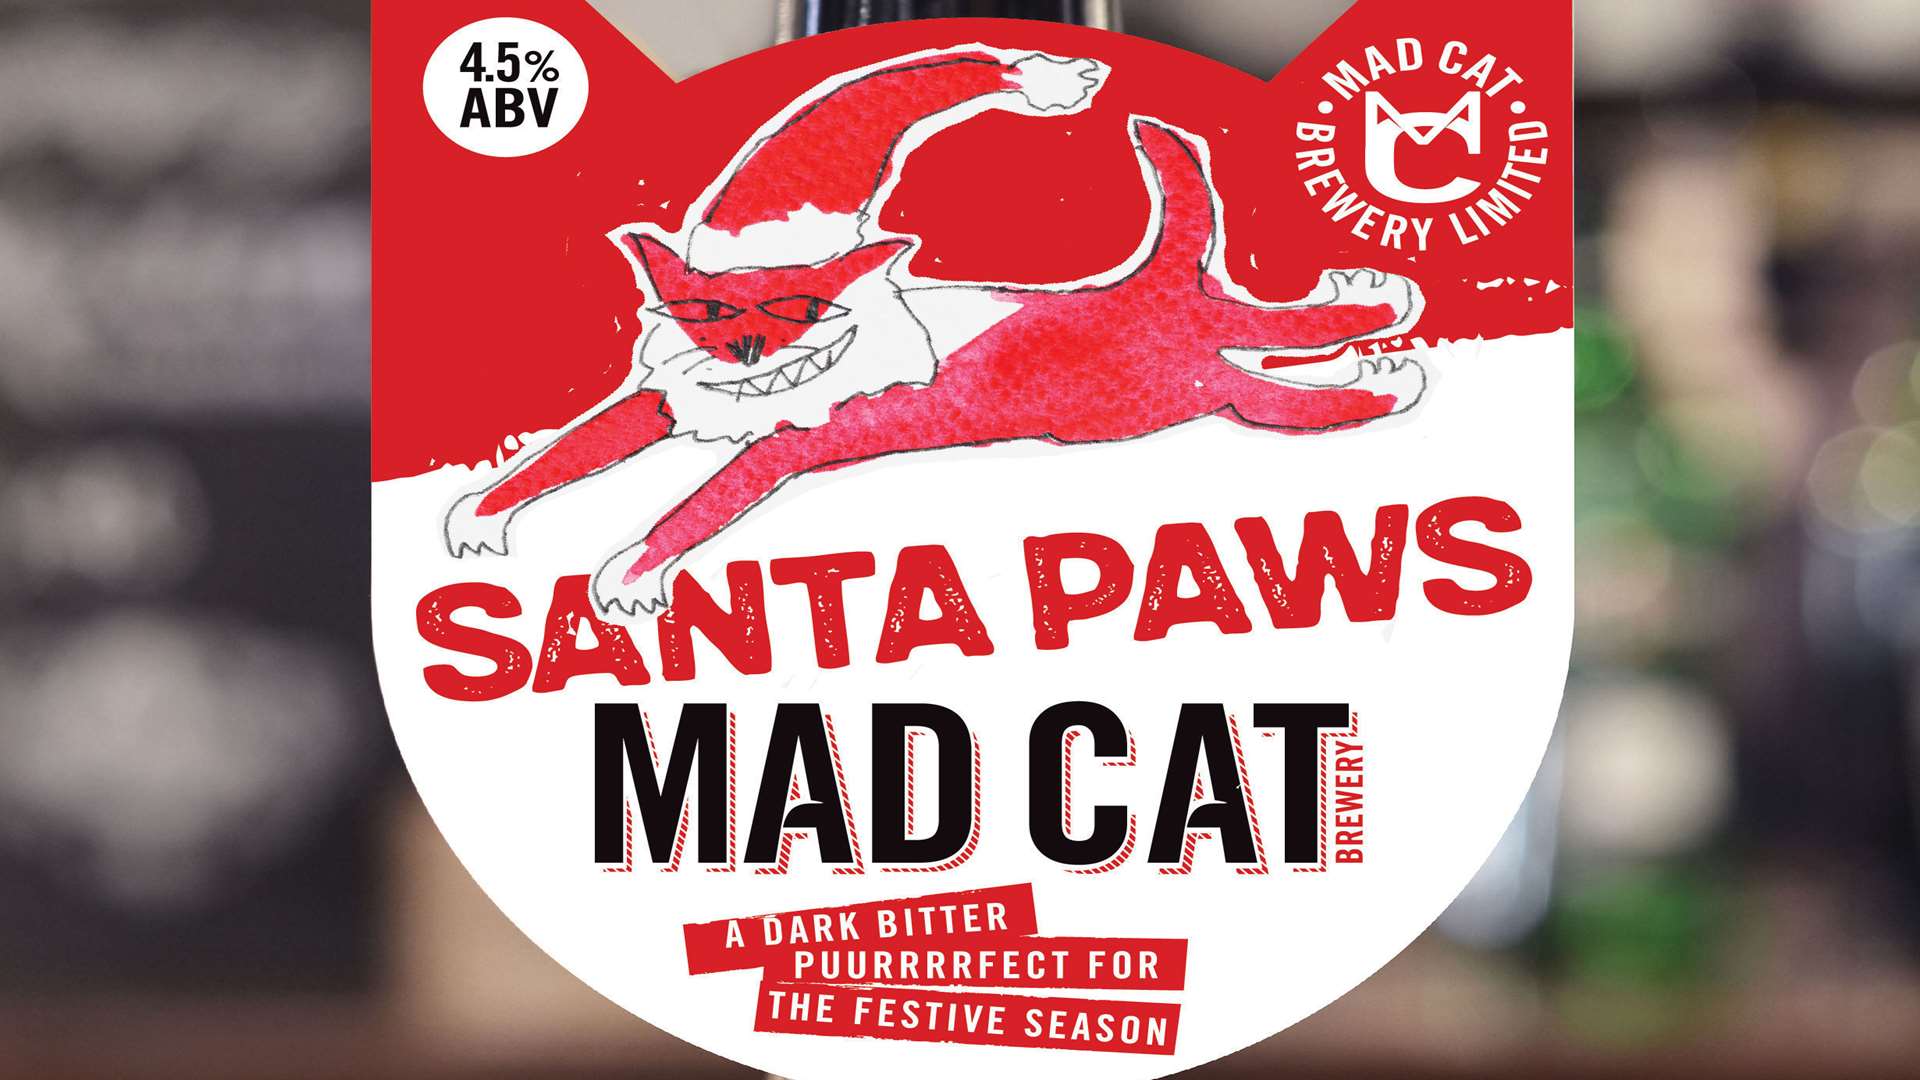 Santa Paws is the Mad Cat Brewery ale